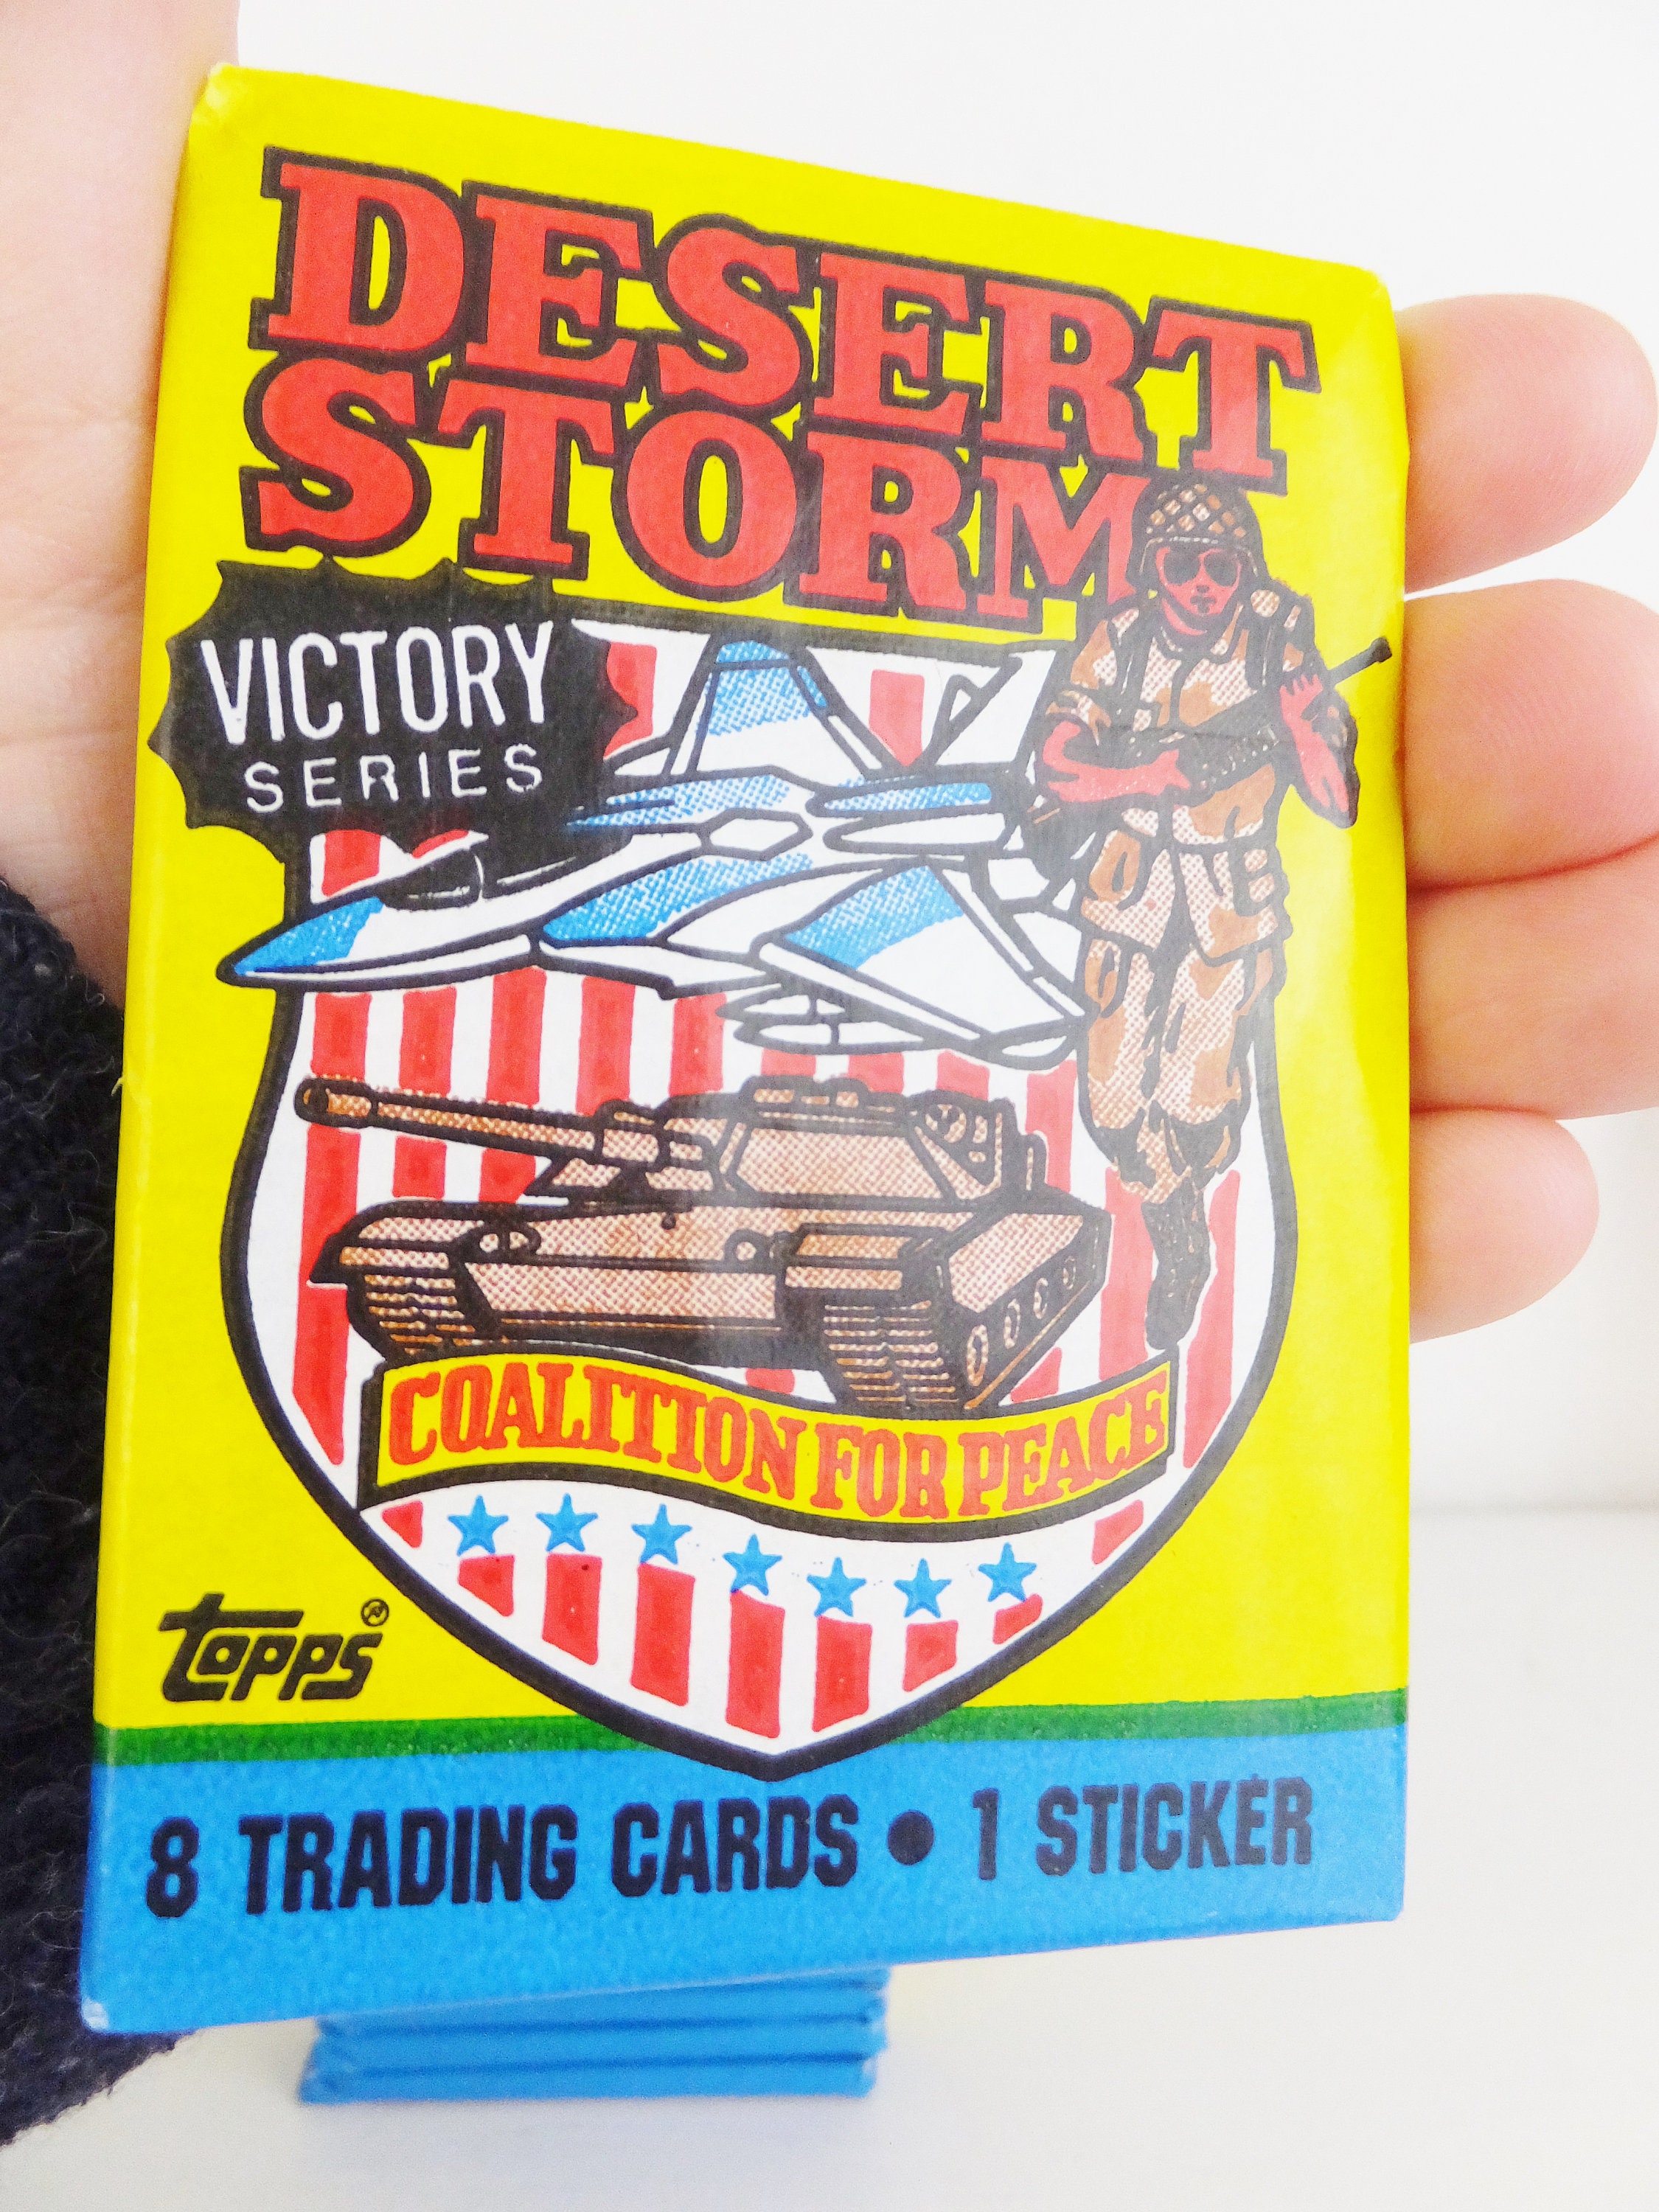 DESERT STORM Series 2 " Victory Series "  Complete Trading Card & Sticker Set 